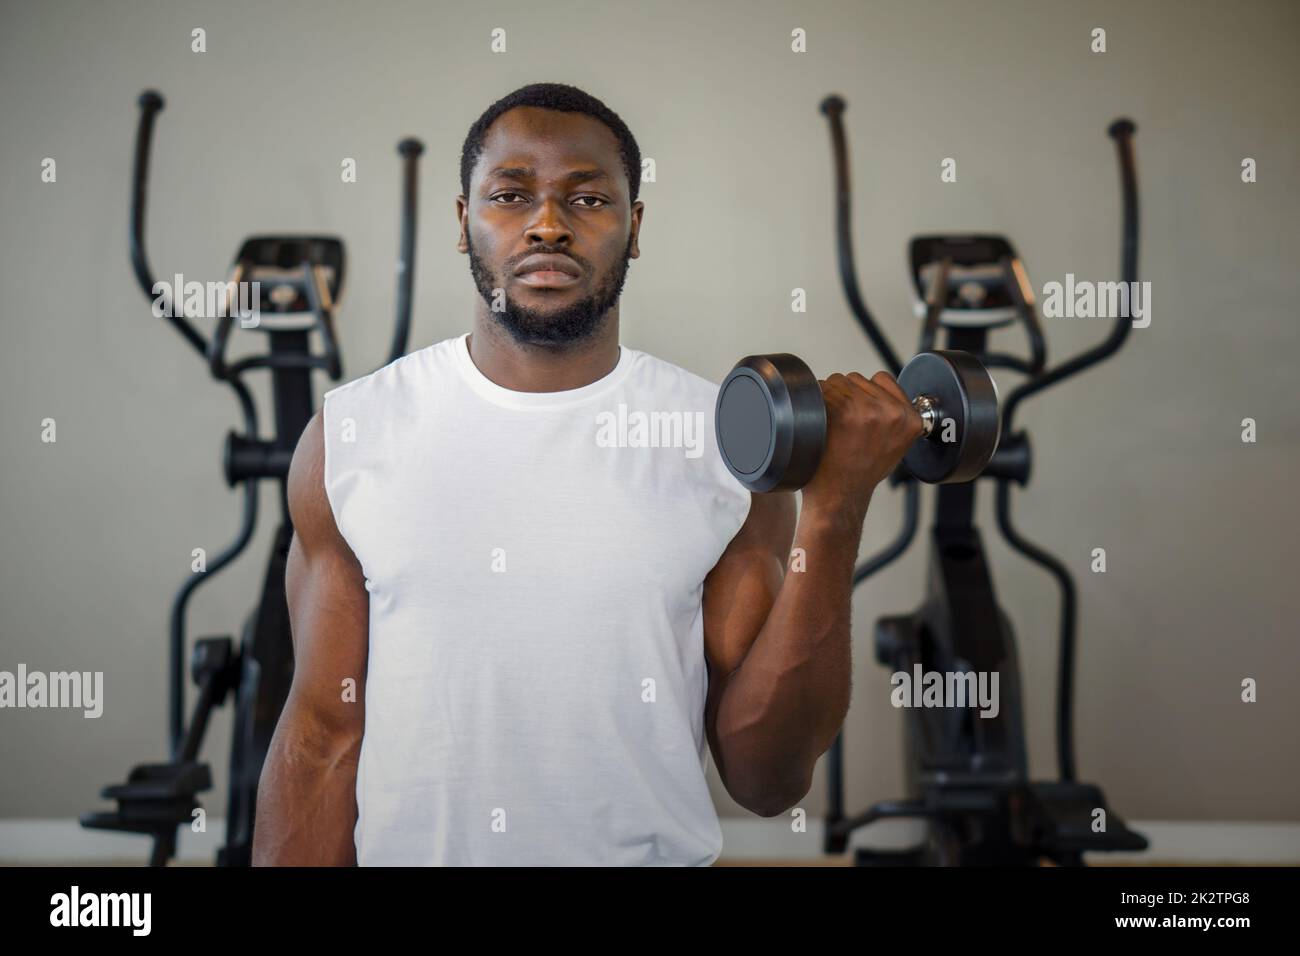 Young short curly black hair man with moustache and beard working on his biceps, lifting barbell with one hand. There are cardio machines in the gym. Stock Photo